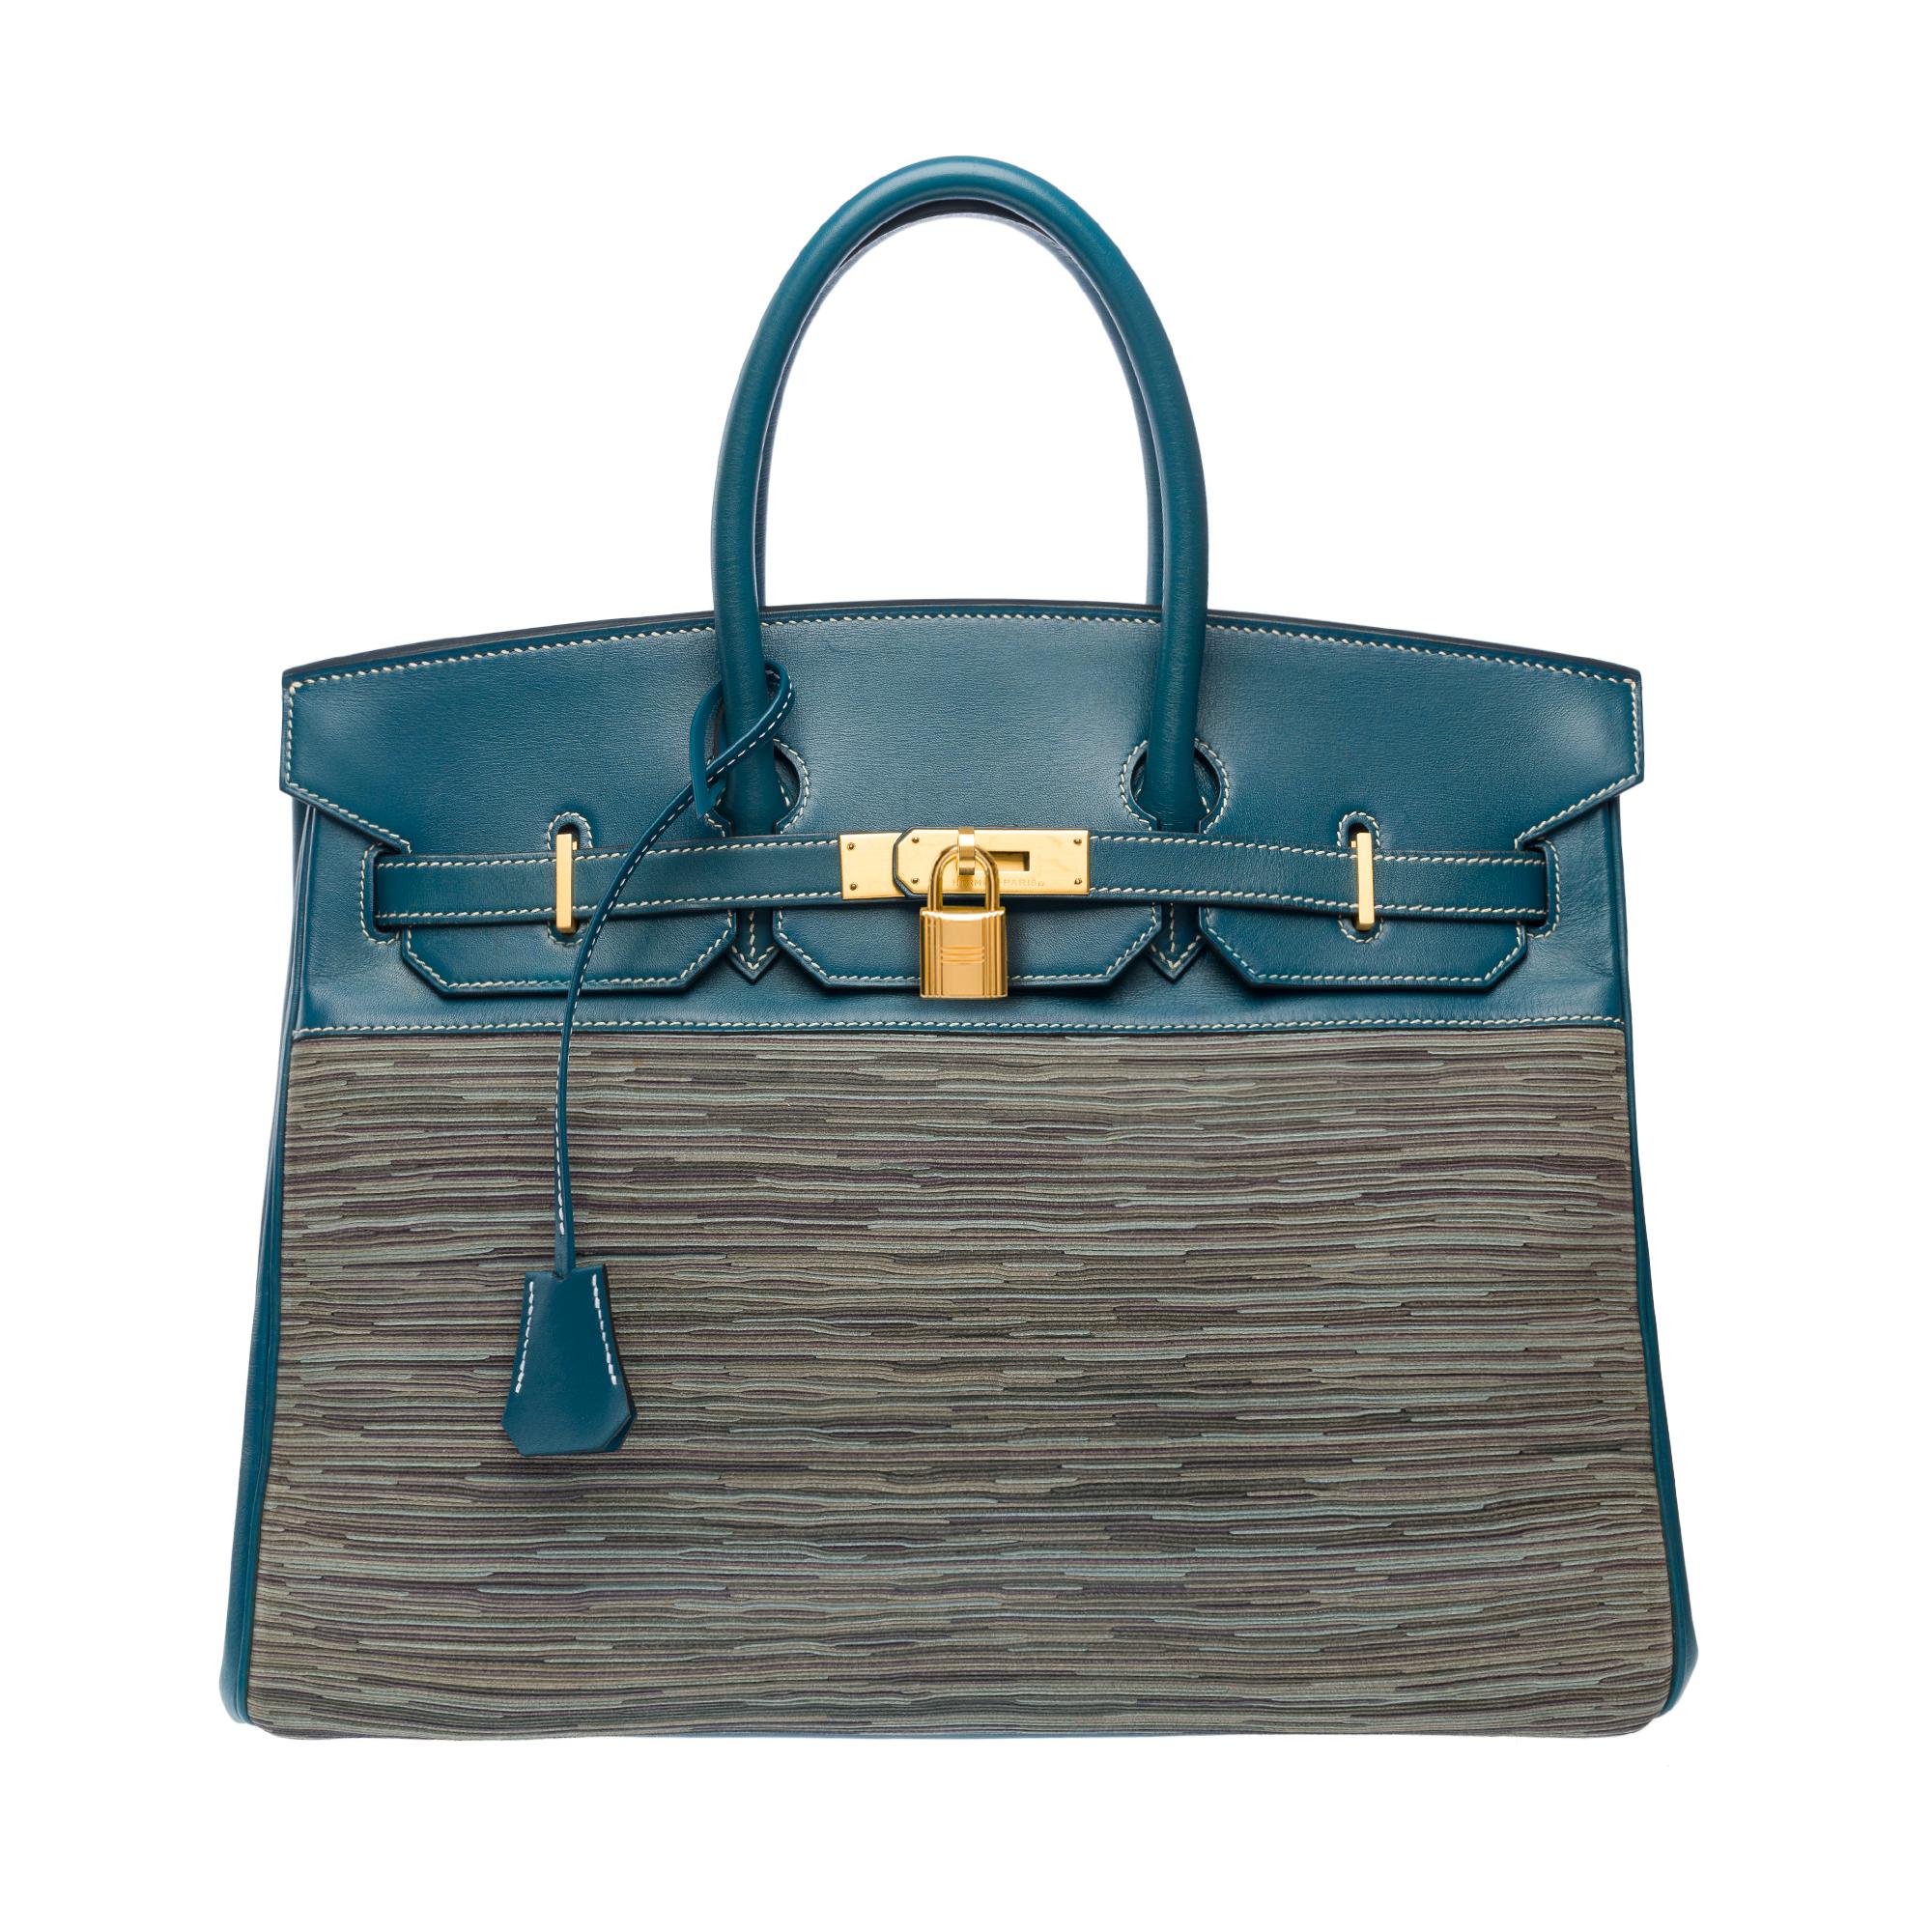 Limited Edition and Rare Hermes Birkin 35 in Blue Thalassa  calf leather, brushed gold metal trim, double handle in blue leather allowing a hand carry

Flap closure
Blue leather inner lining, a zippered pocket, a patch pocket
Signature: 